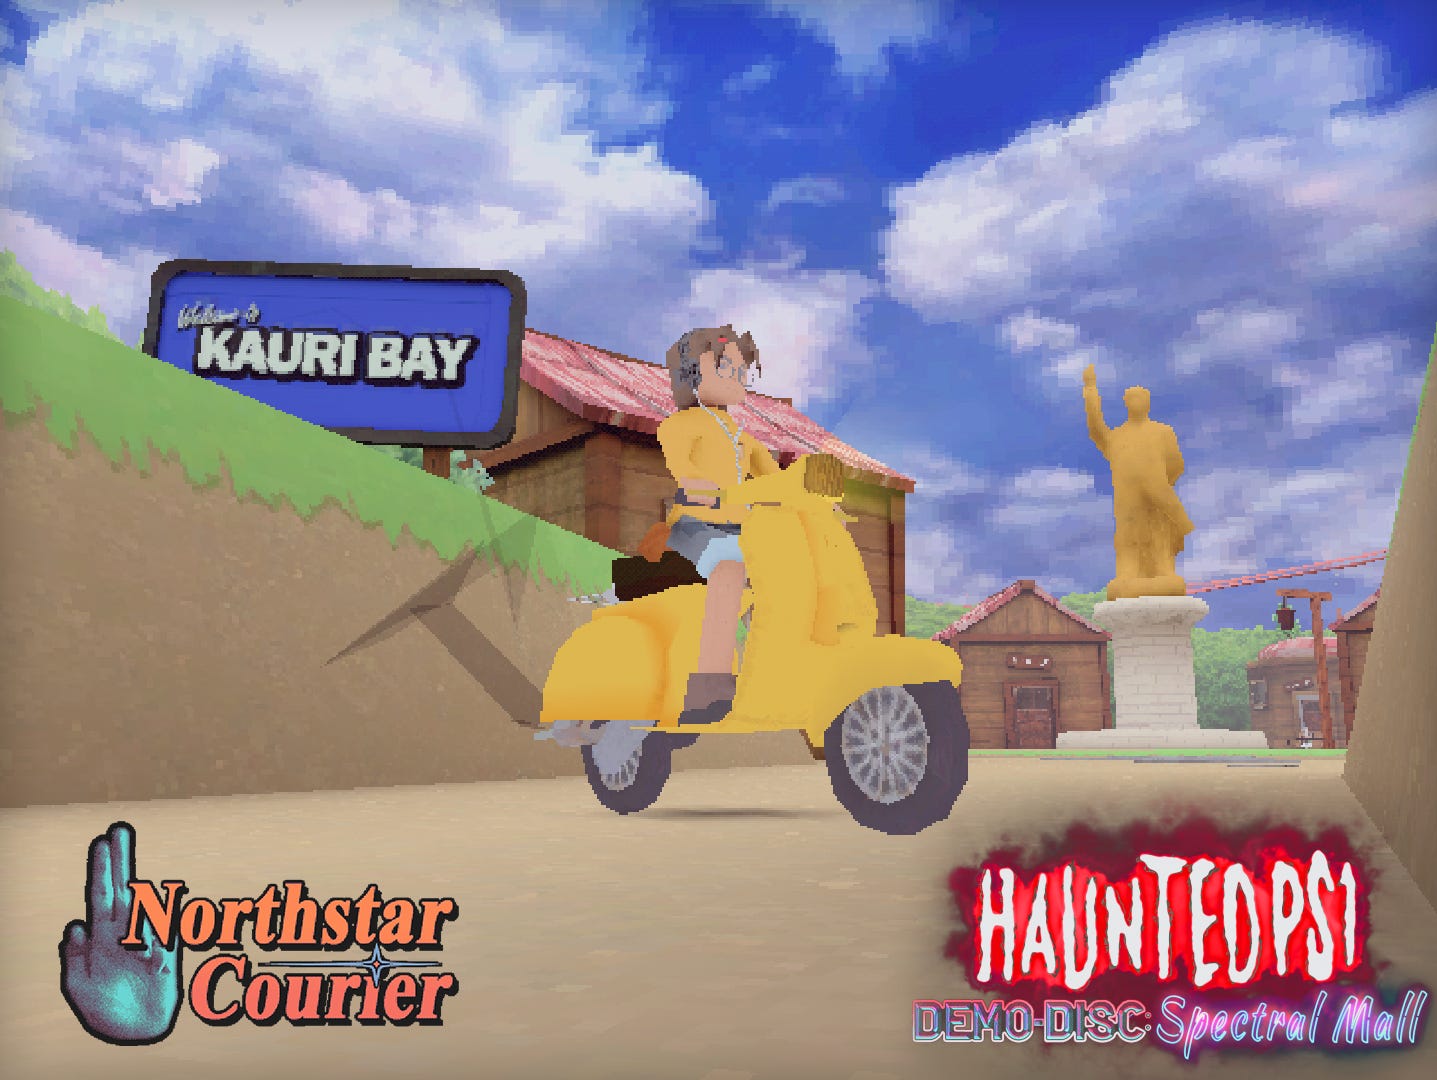 Northstar Courier from the Haunted PS1 Demo Disc: Spectral Mall. A low-poly figure with headphones, a tellow shirt, and shorts sits atop a yellow motor-scooter. A sign reading "Welcome to Kauri Bay" is visible over their shoulder. Behind them is a small town of wooden houses surrounding a tall golden statue of a man with his arm raised. The sky is a beautiful blue, filled with light clouds.